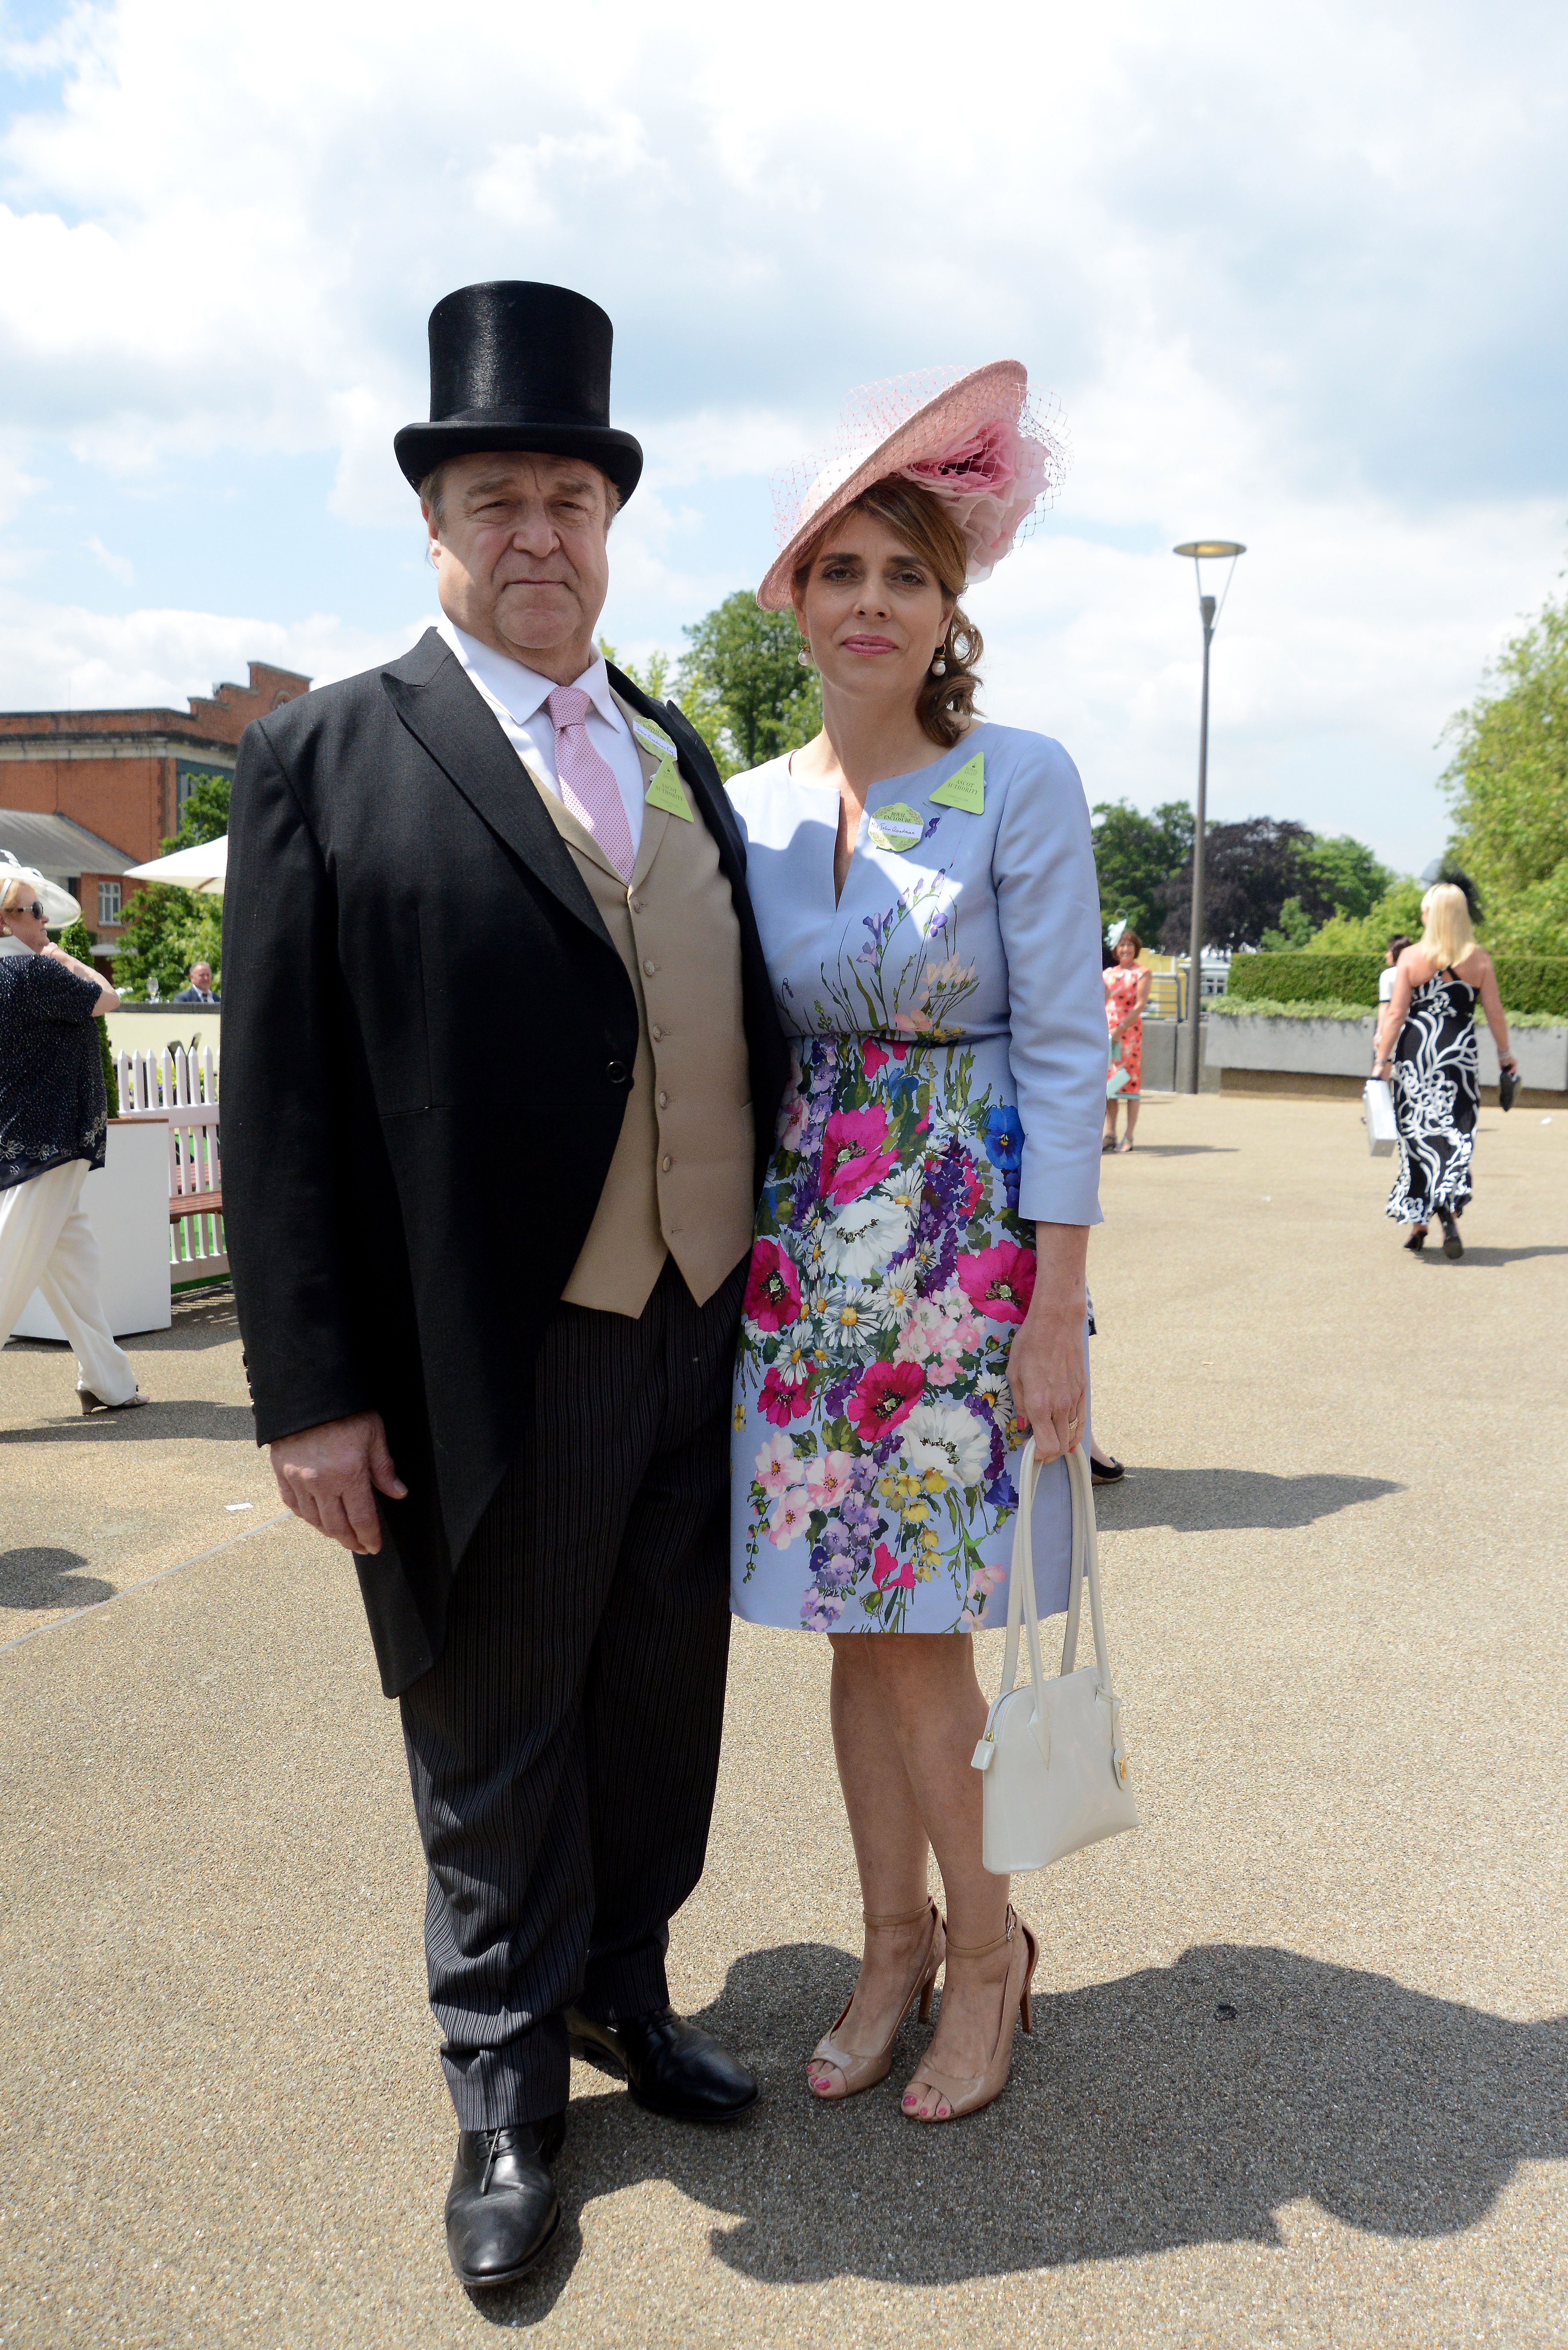 John Goodman and wife Annabeth Hartzog attend the Royal Ascot in Ascot, England on June 16, 2015 | Photo: Getty Images